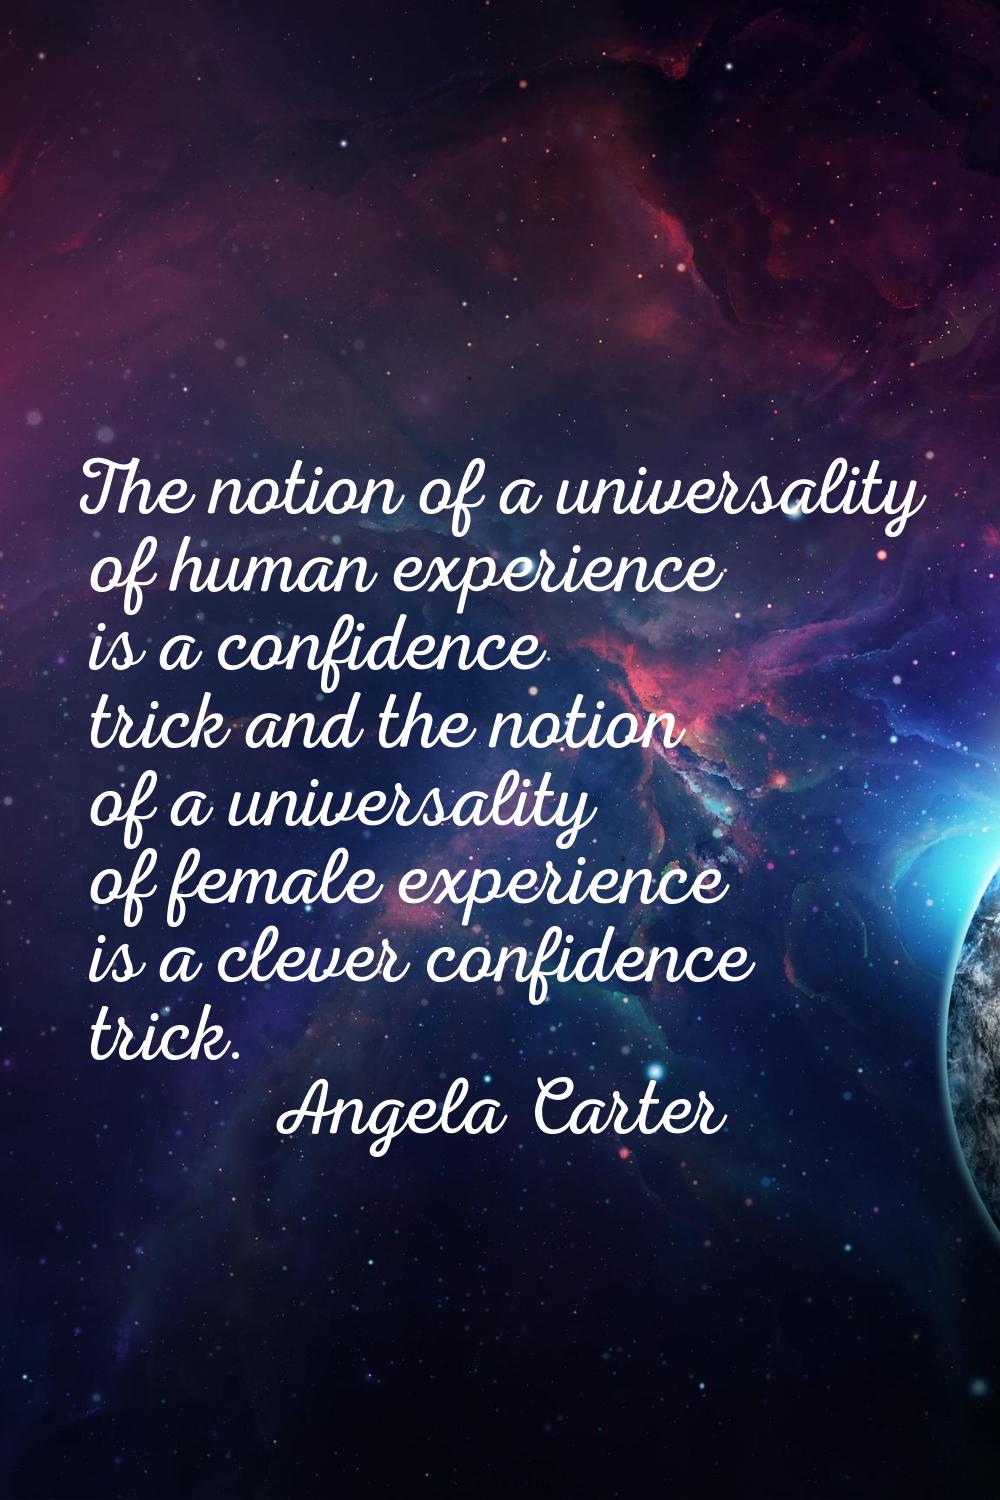 The notion of a universality of human experience is a confidence trick and the notion of a universa